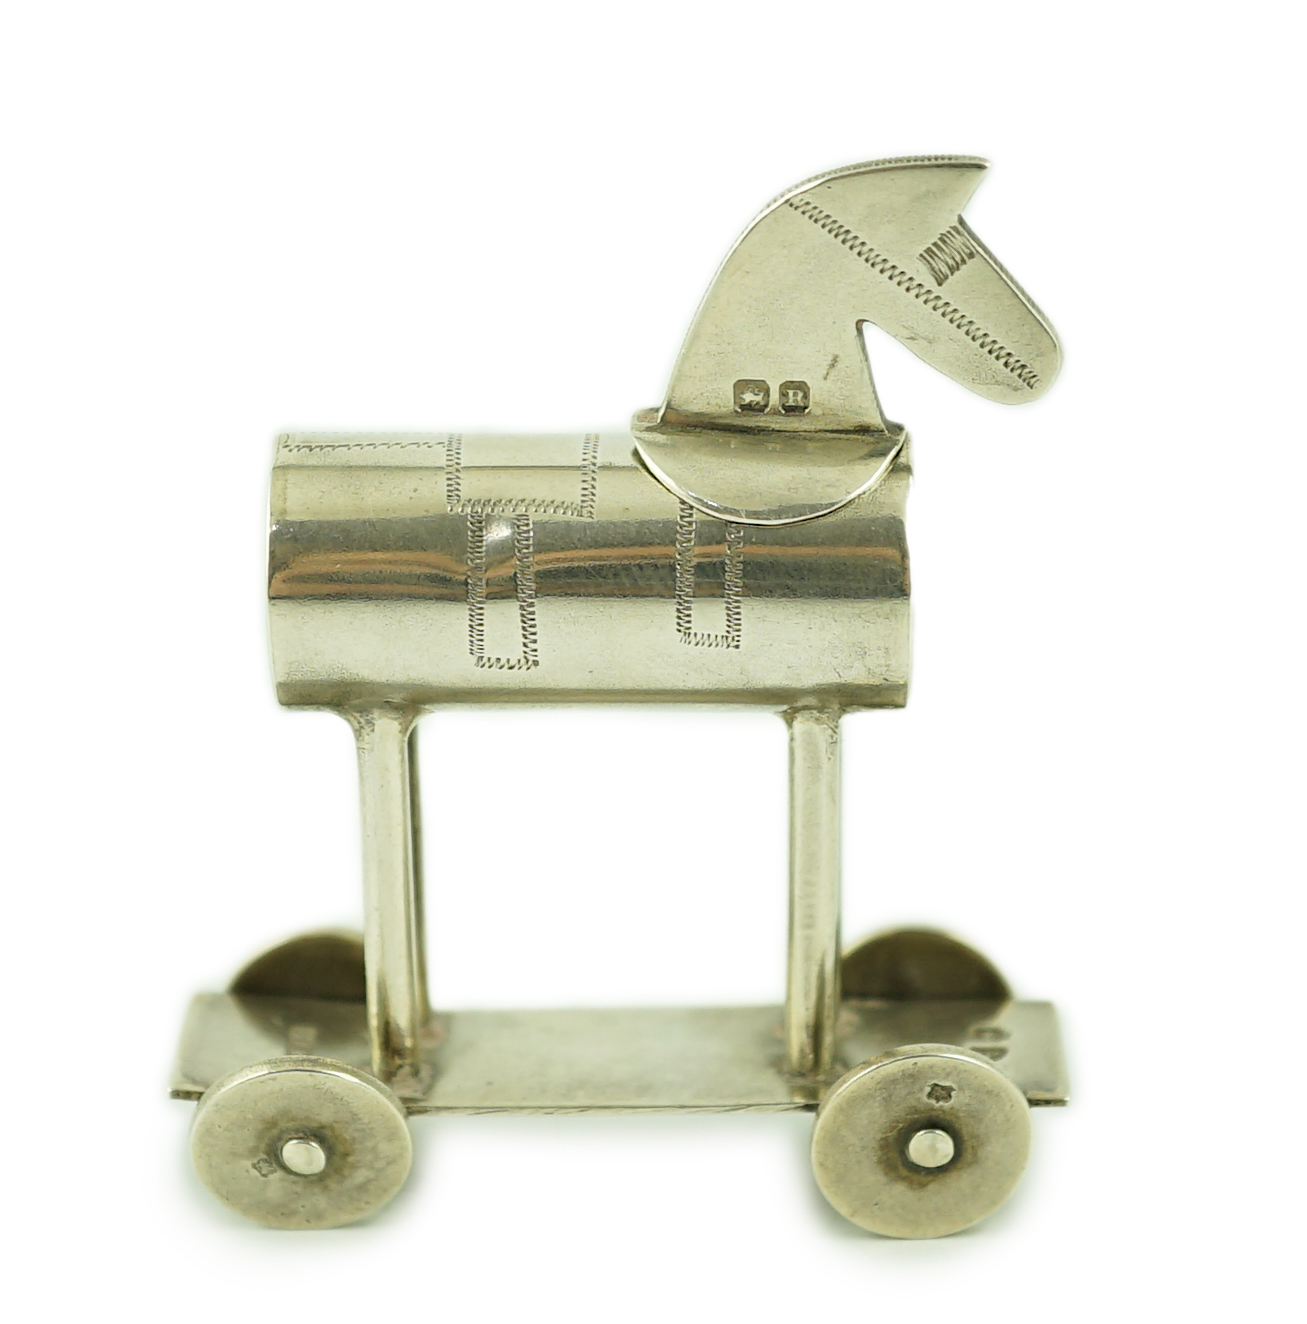 A late Victorian novelty silver cayenne pepper condiment, modelled as a Hobby horse, by Saunders & Shepherd